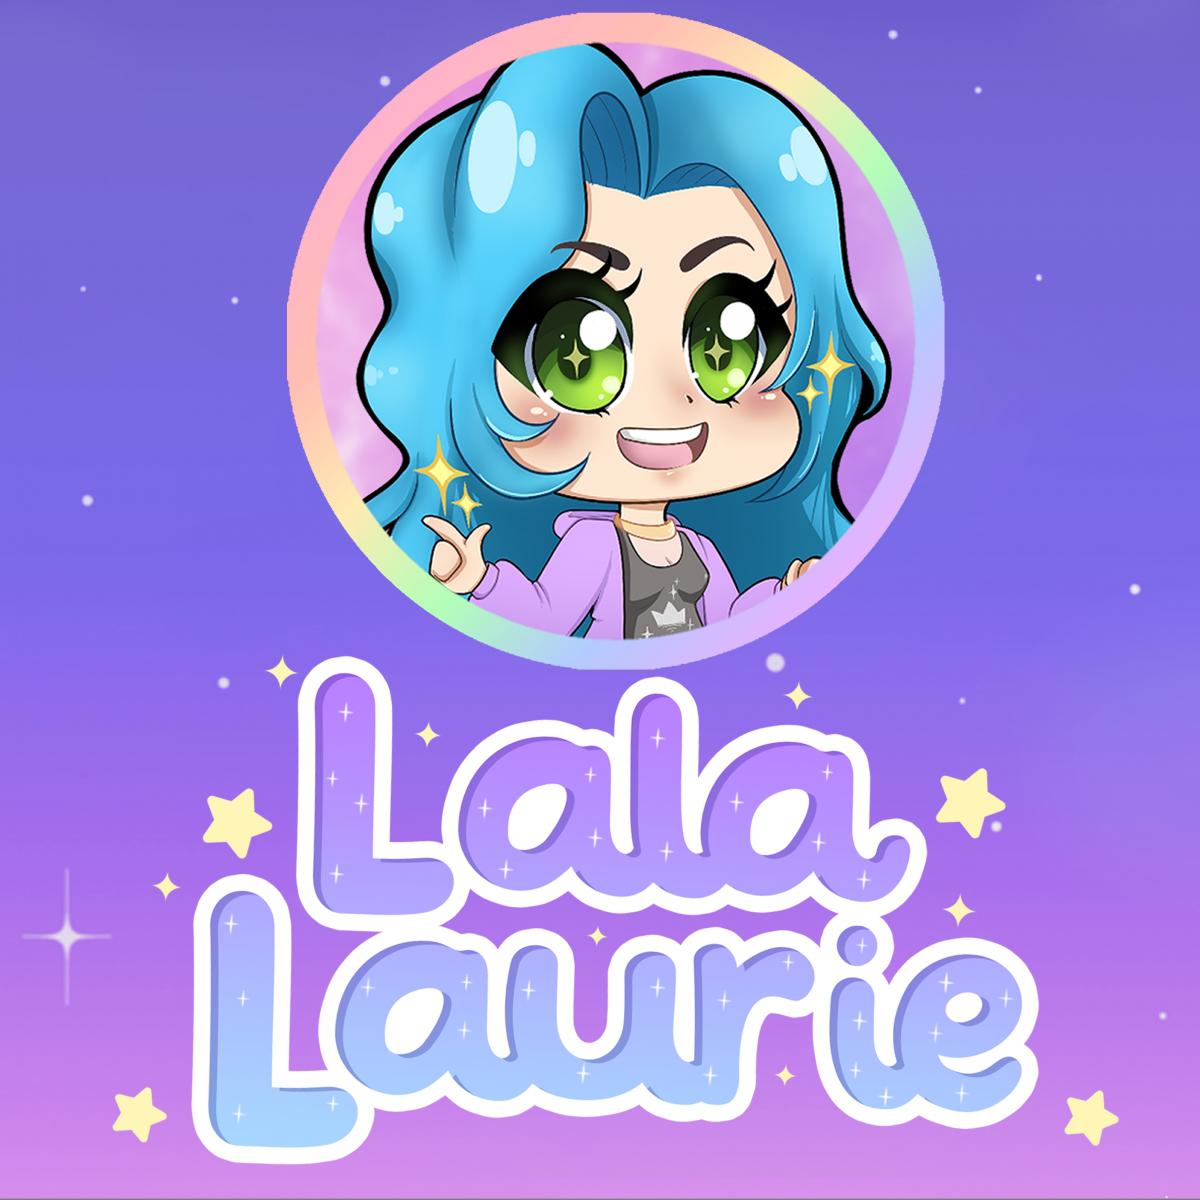 Laurie User Profile